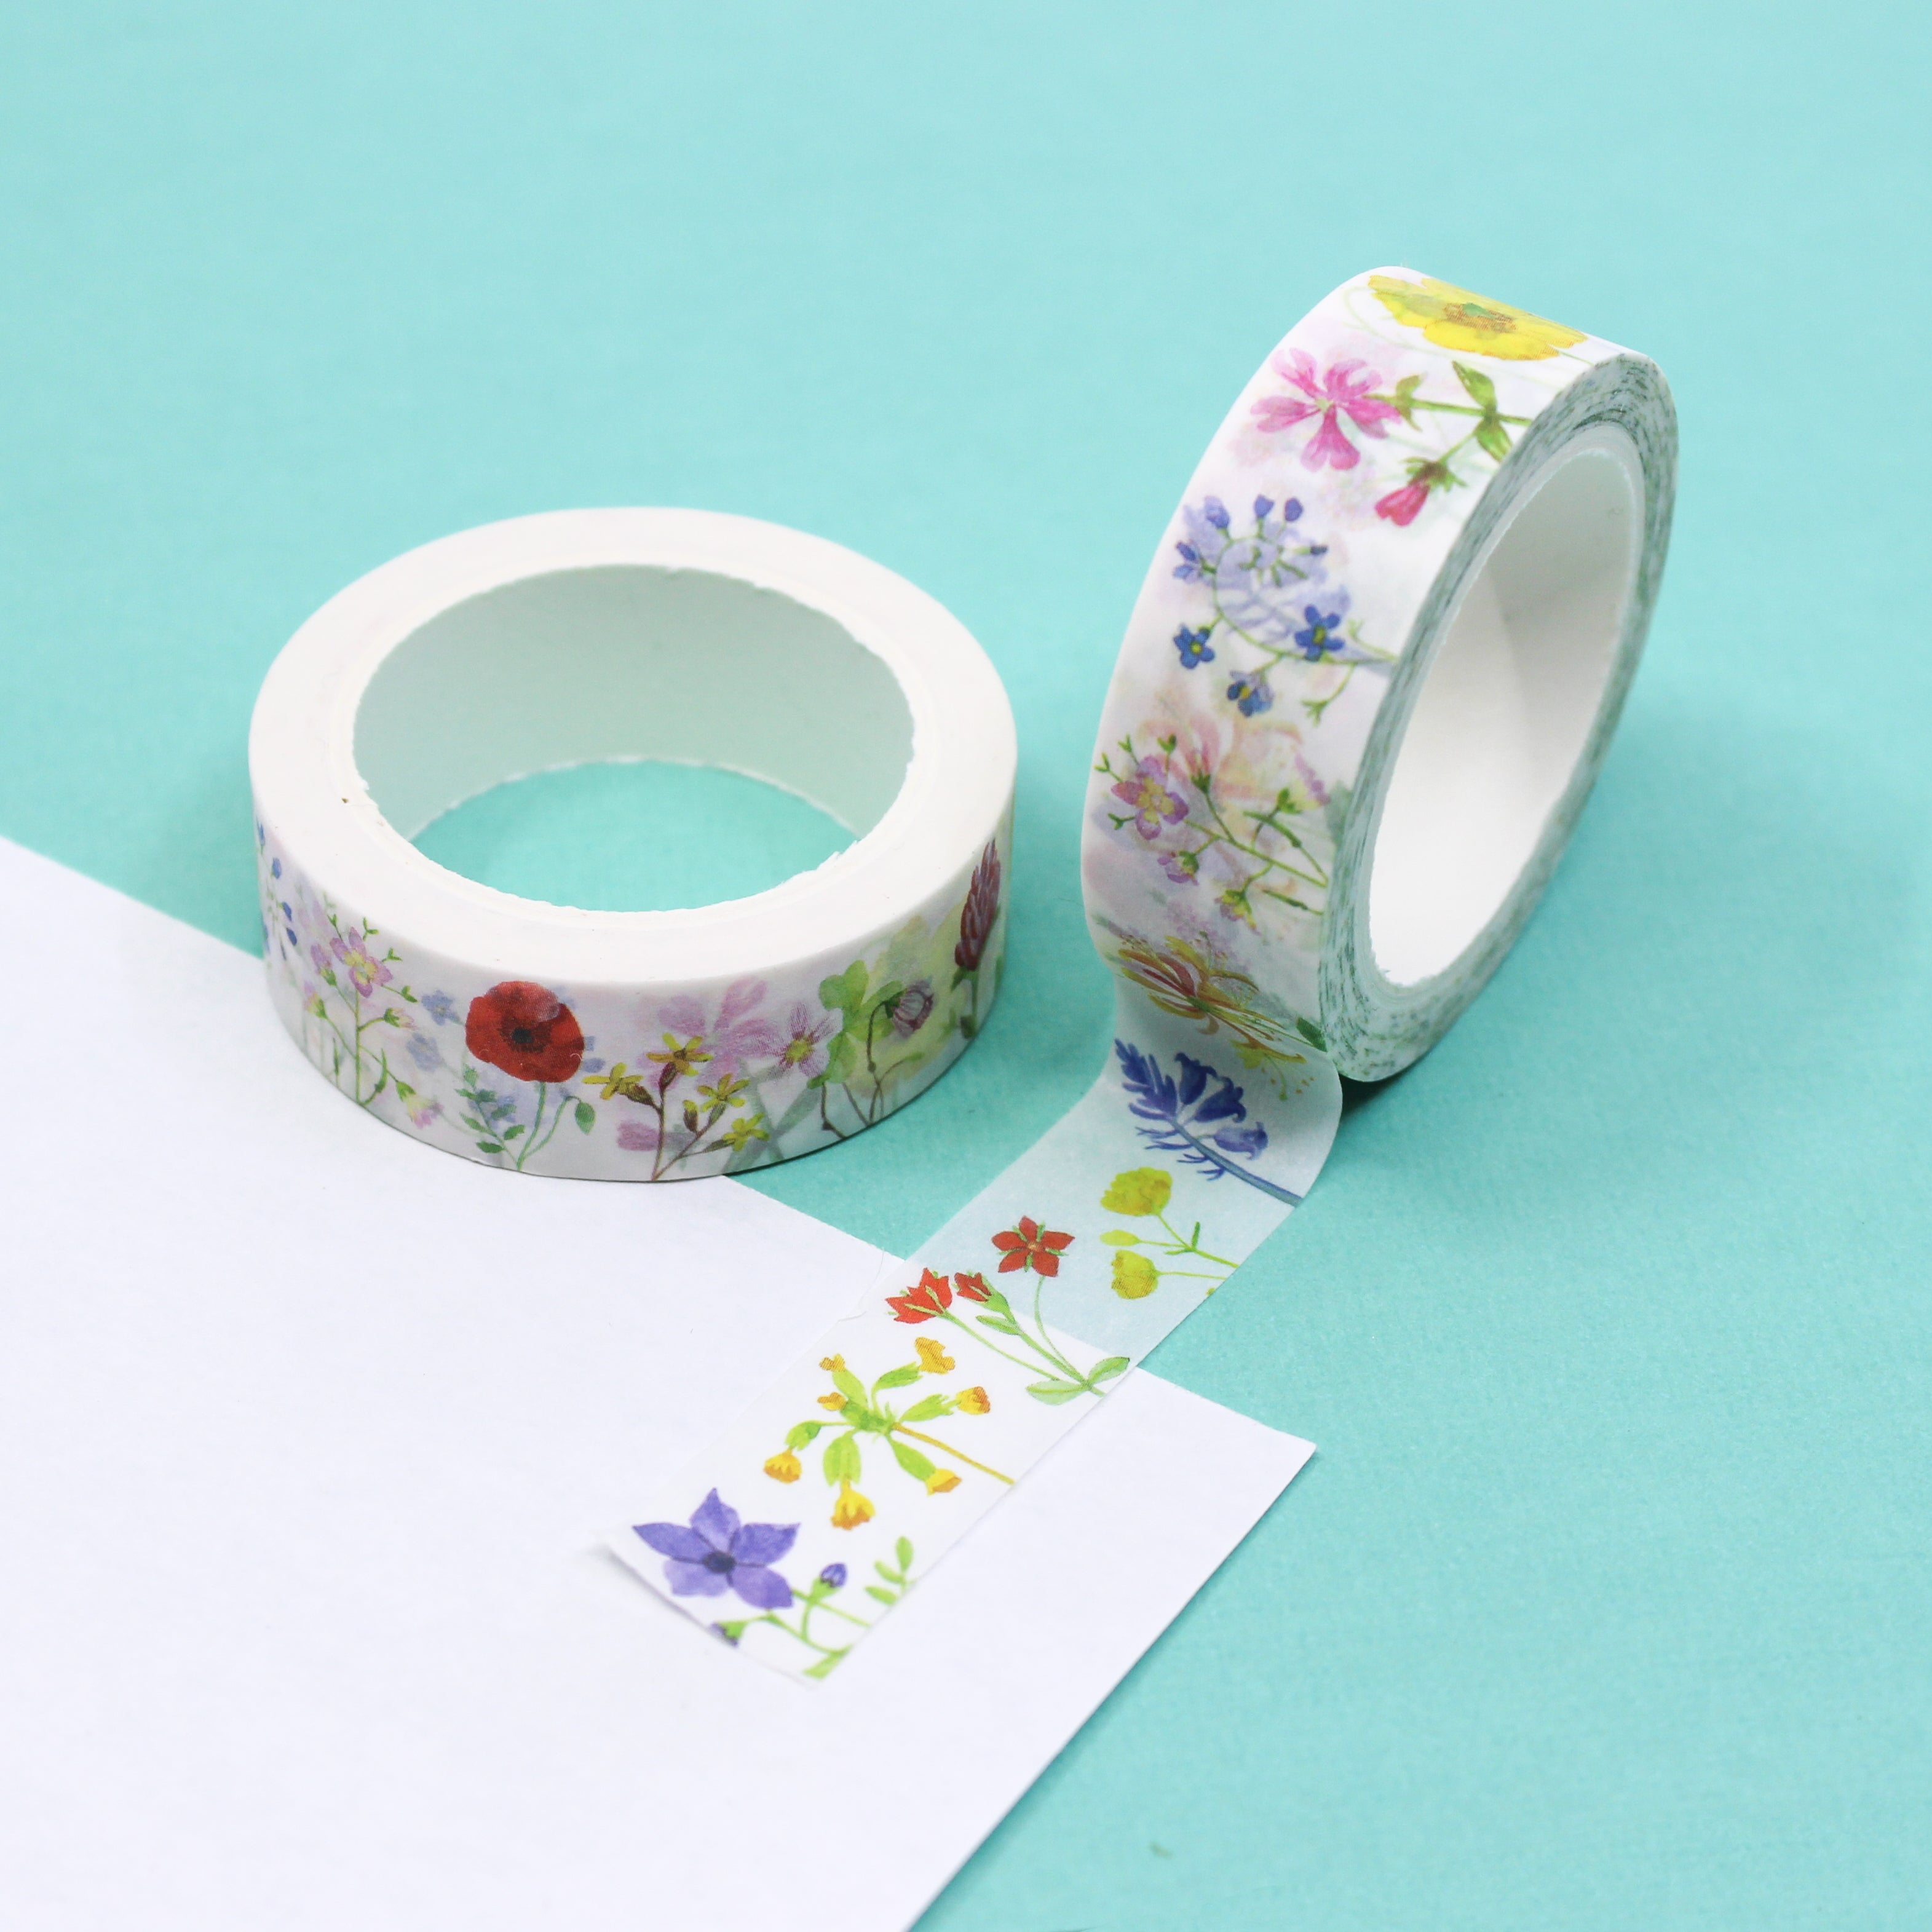 Elevate your crafts with our British Floral Washi Tape, adorned with a delightful pattern of native British flowers. Perfect for adding a touch of natural beauty and elegance to your projects. This tape is designed by Sarah Francis and sold at BBB Supplies Craft Shop.